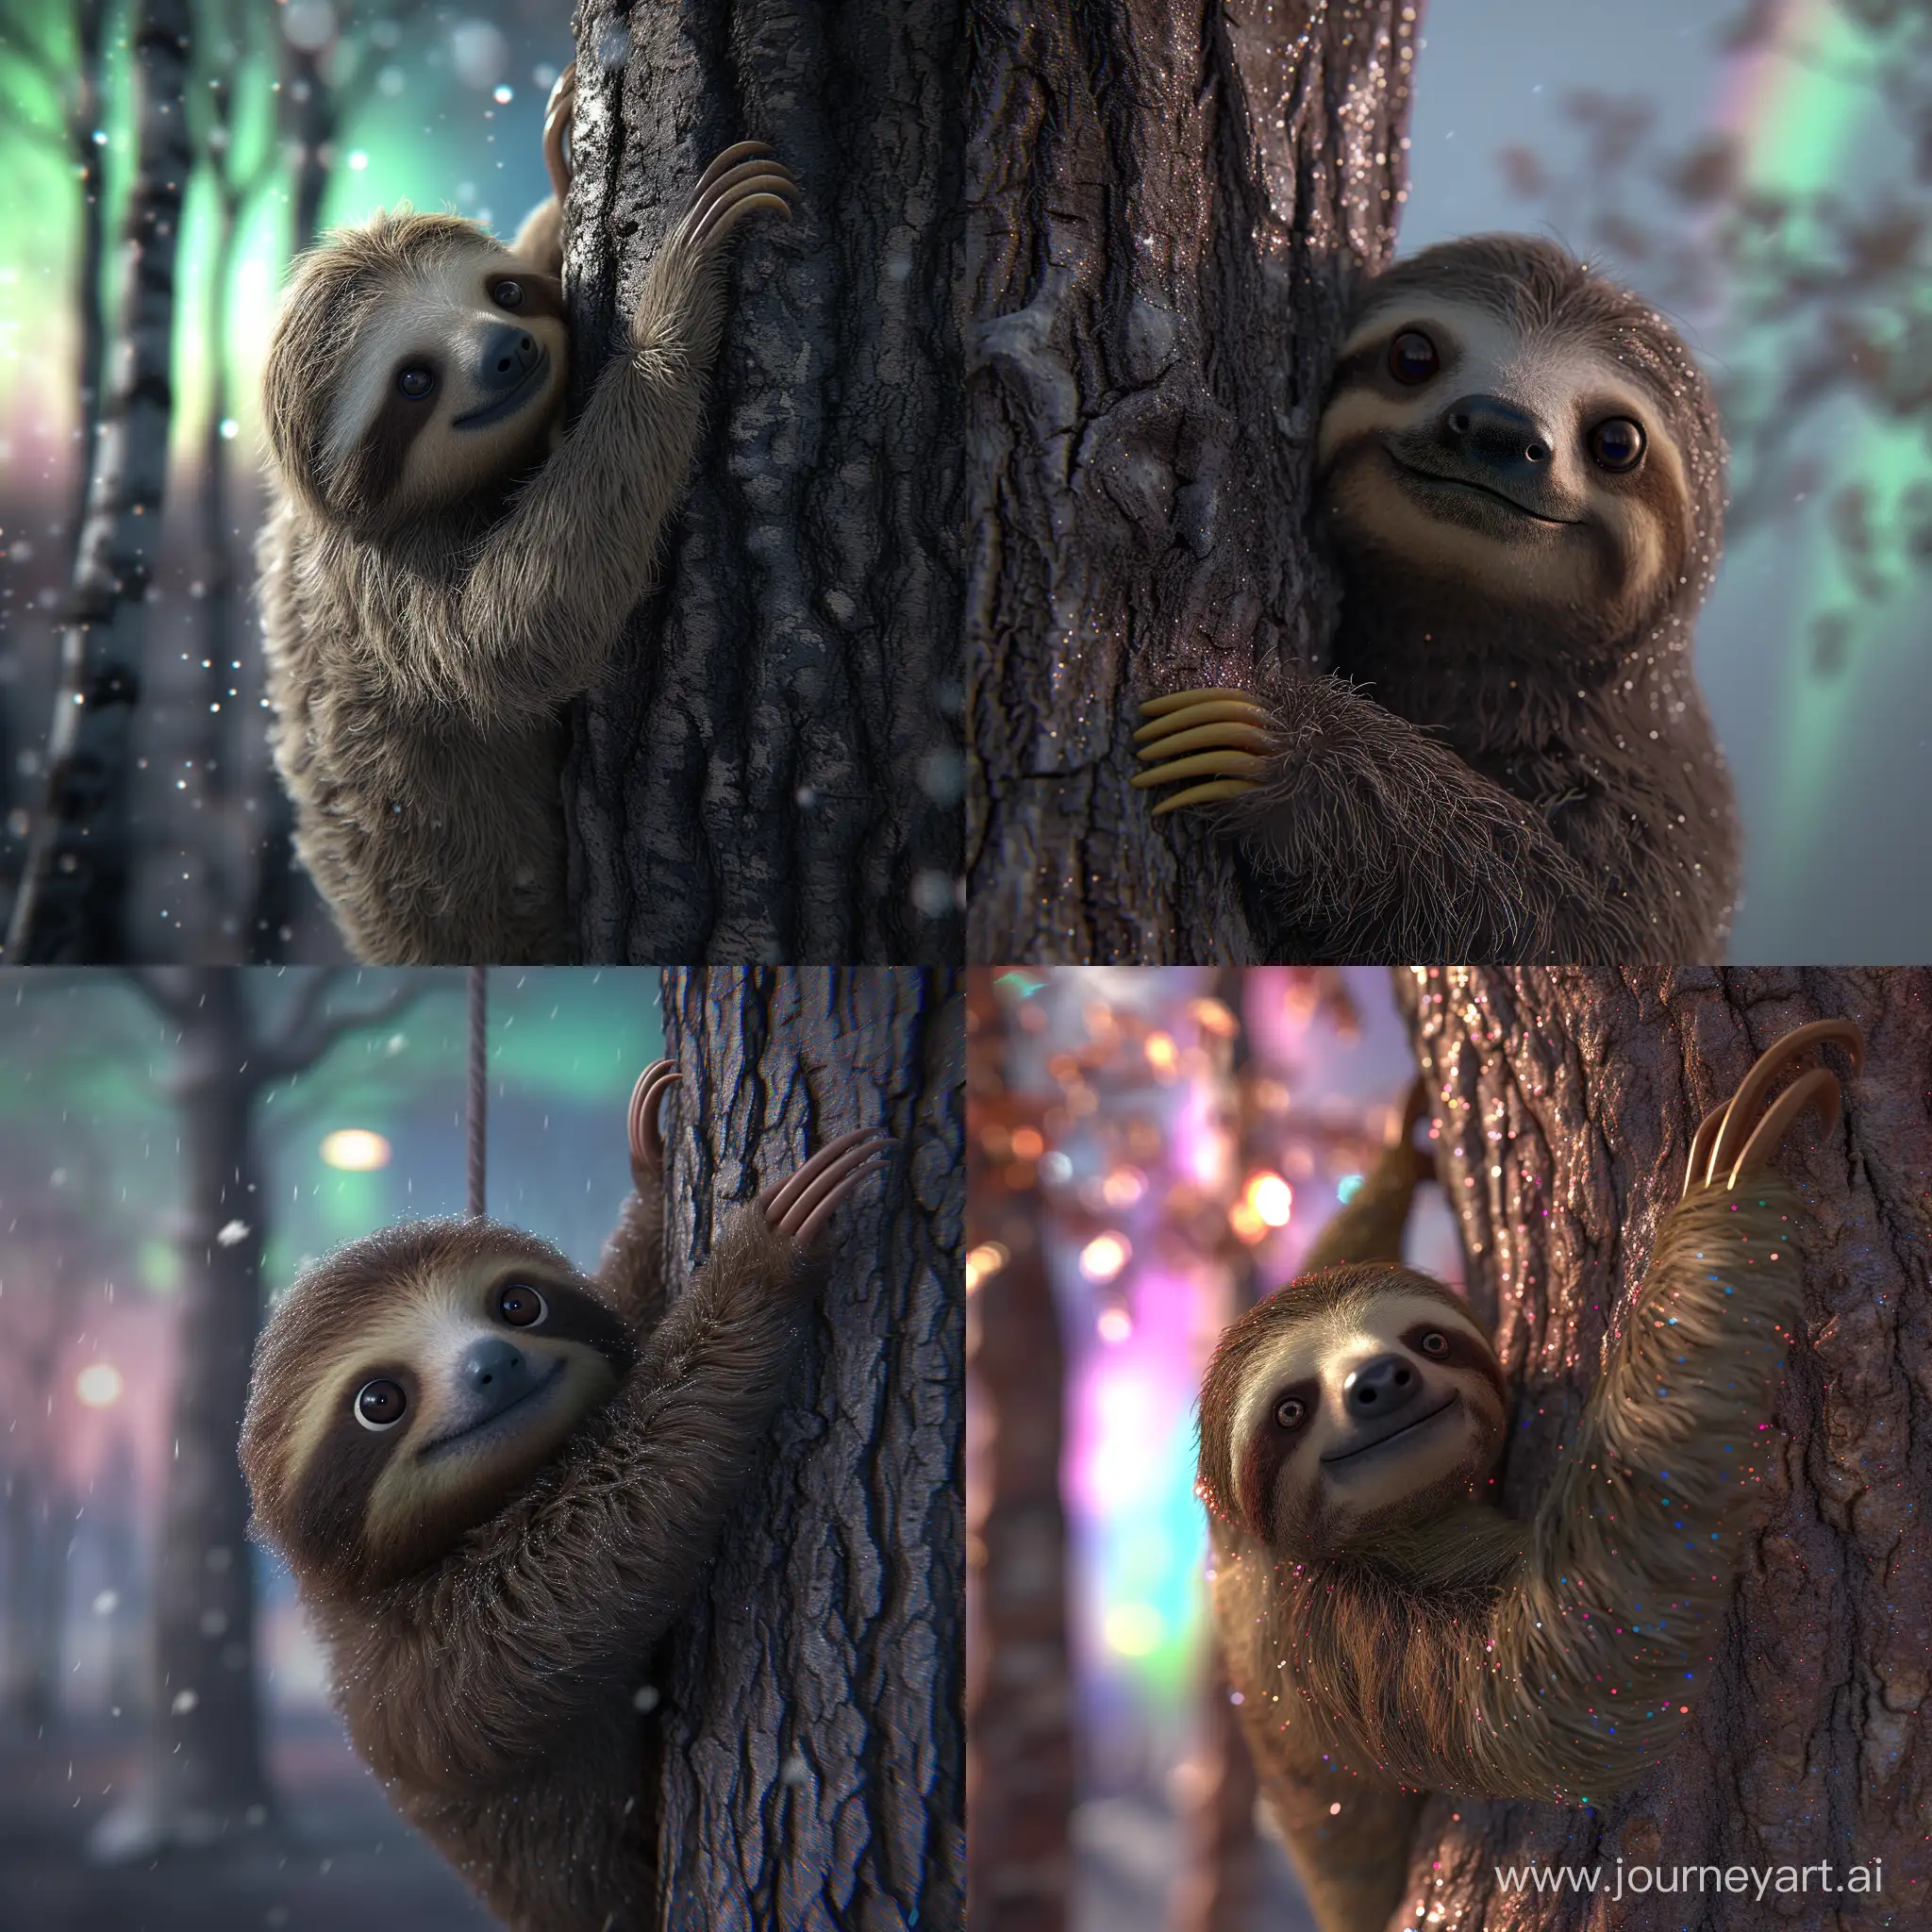 Realistic-BigEyed-Sloth-Hanging-from-Tree-in-Fantasy-Twilight-with-Aurora-Borealis